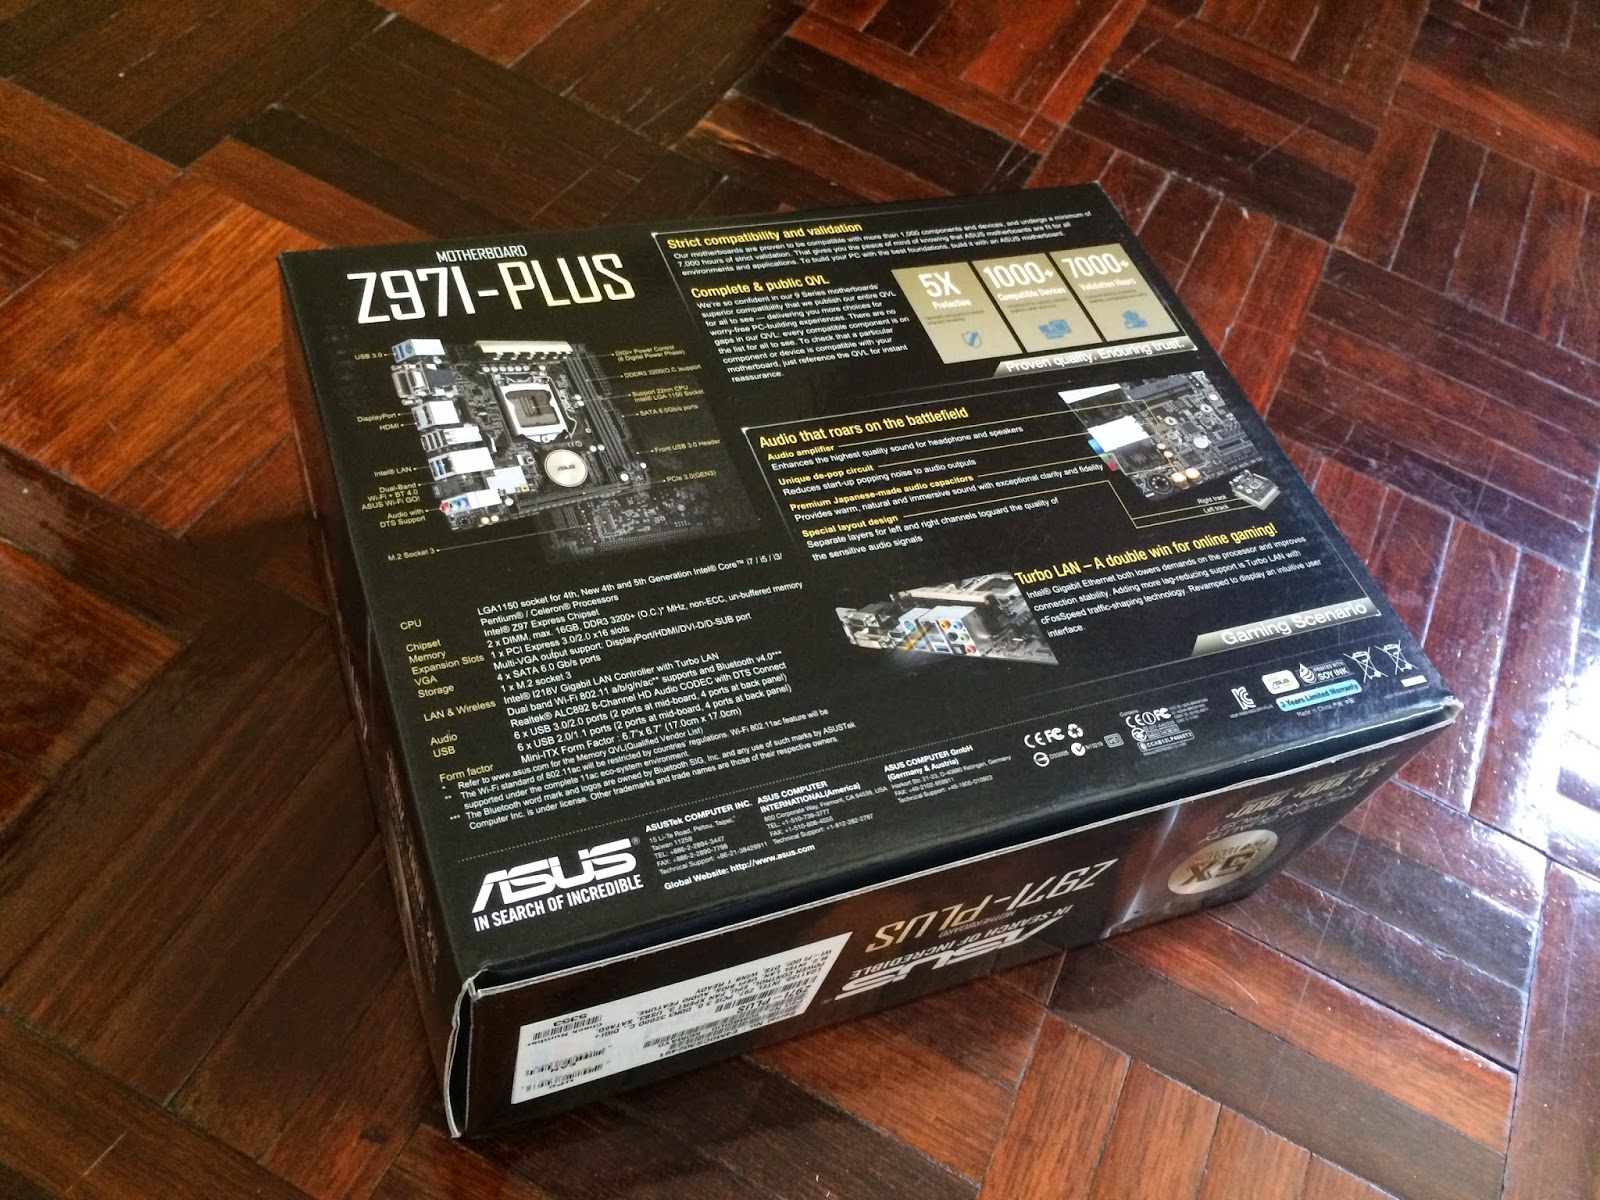 Unboxing & Review - ASUS Z97I-PLUS 4